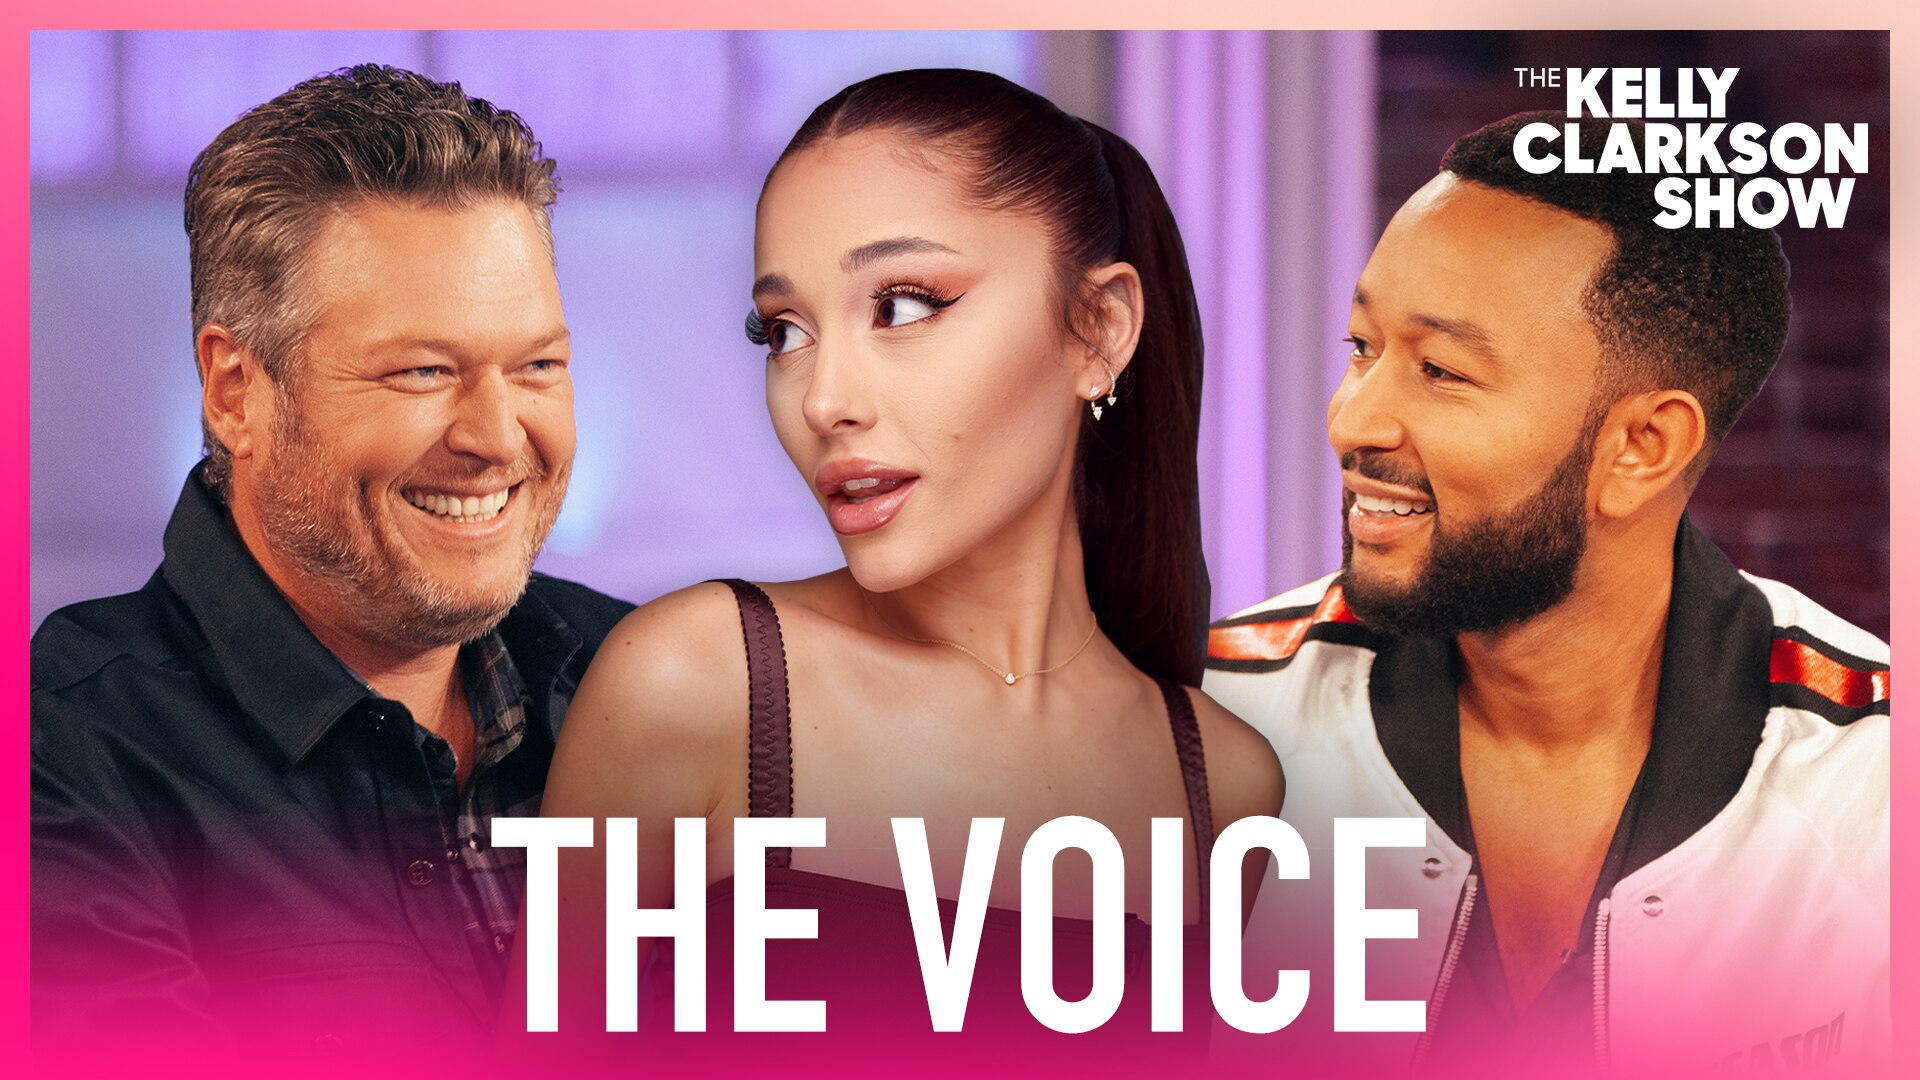 Watch The Kelly Clarkson Show Official Website Highlight The Voice Judges Kelly Clarkson